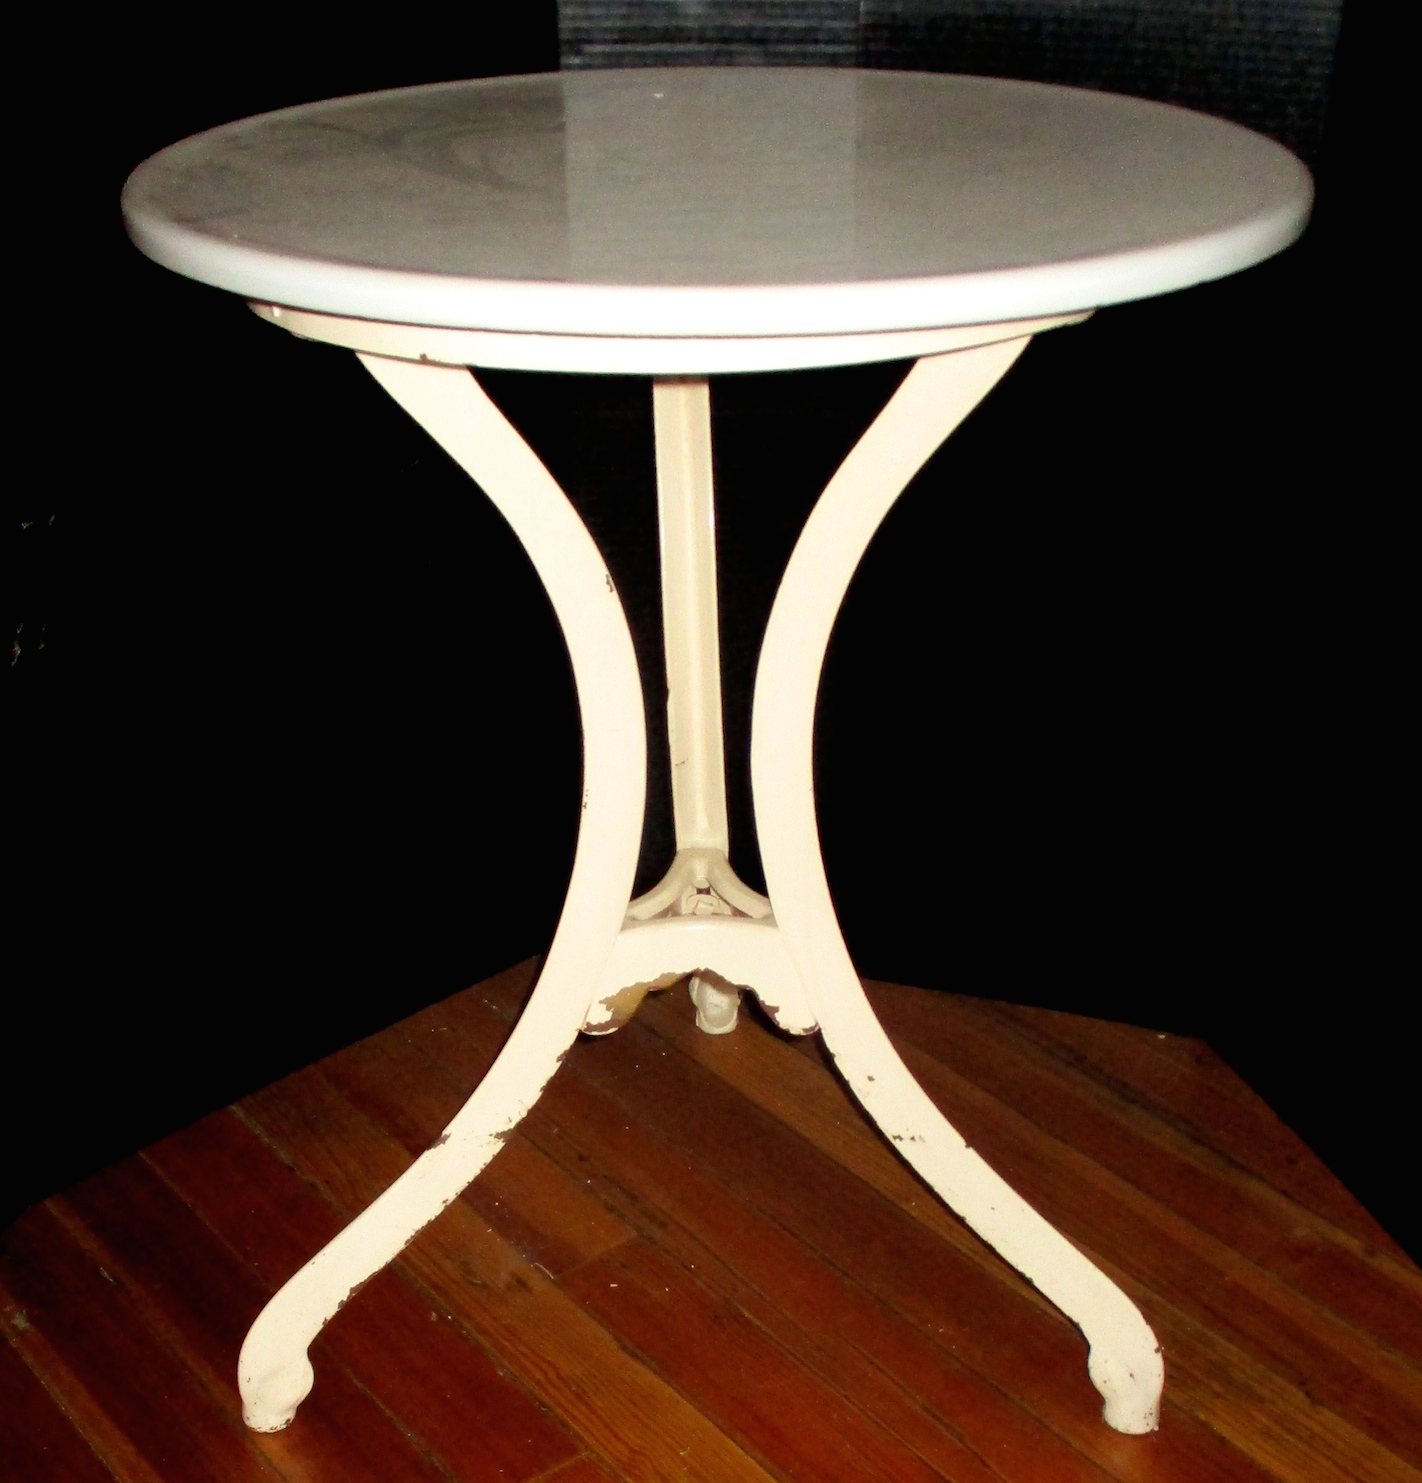 Cast Iron Base Ice Cream Parlor Table w/ Glass Top (Original Condition - We can restore to customer's specifications)